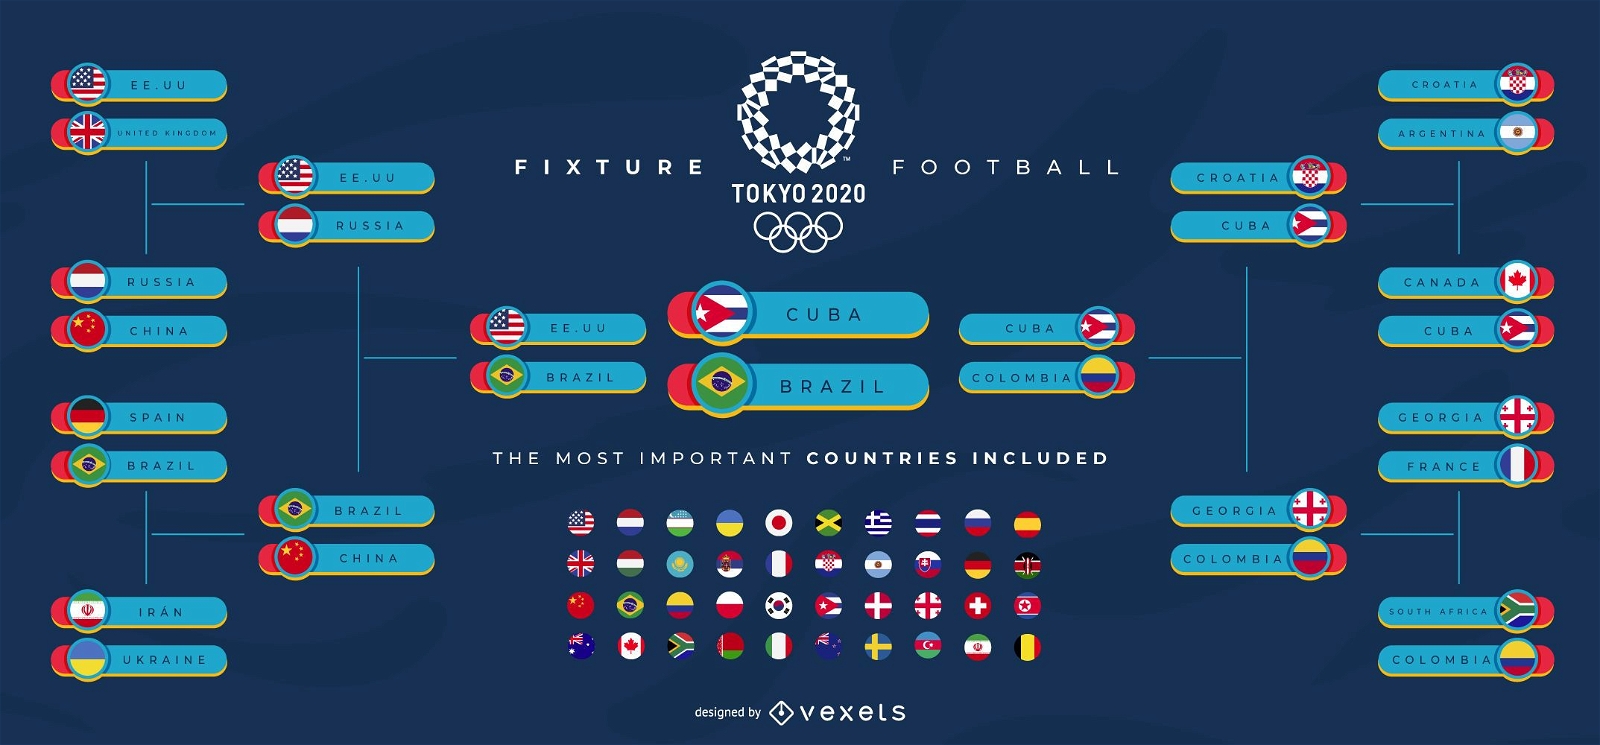 Olympic Games Tournament Fixture Template Vector Download